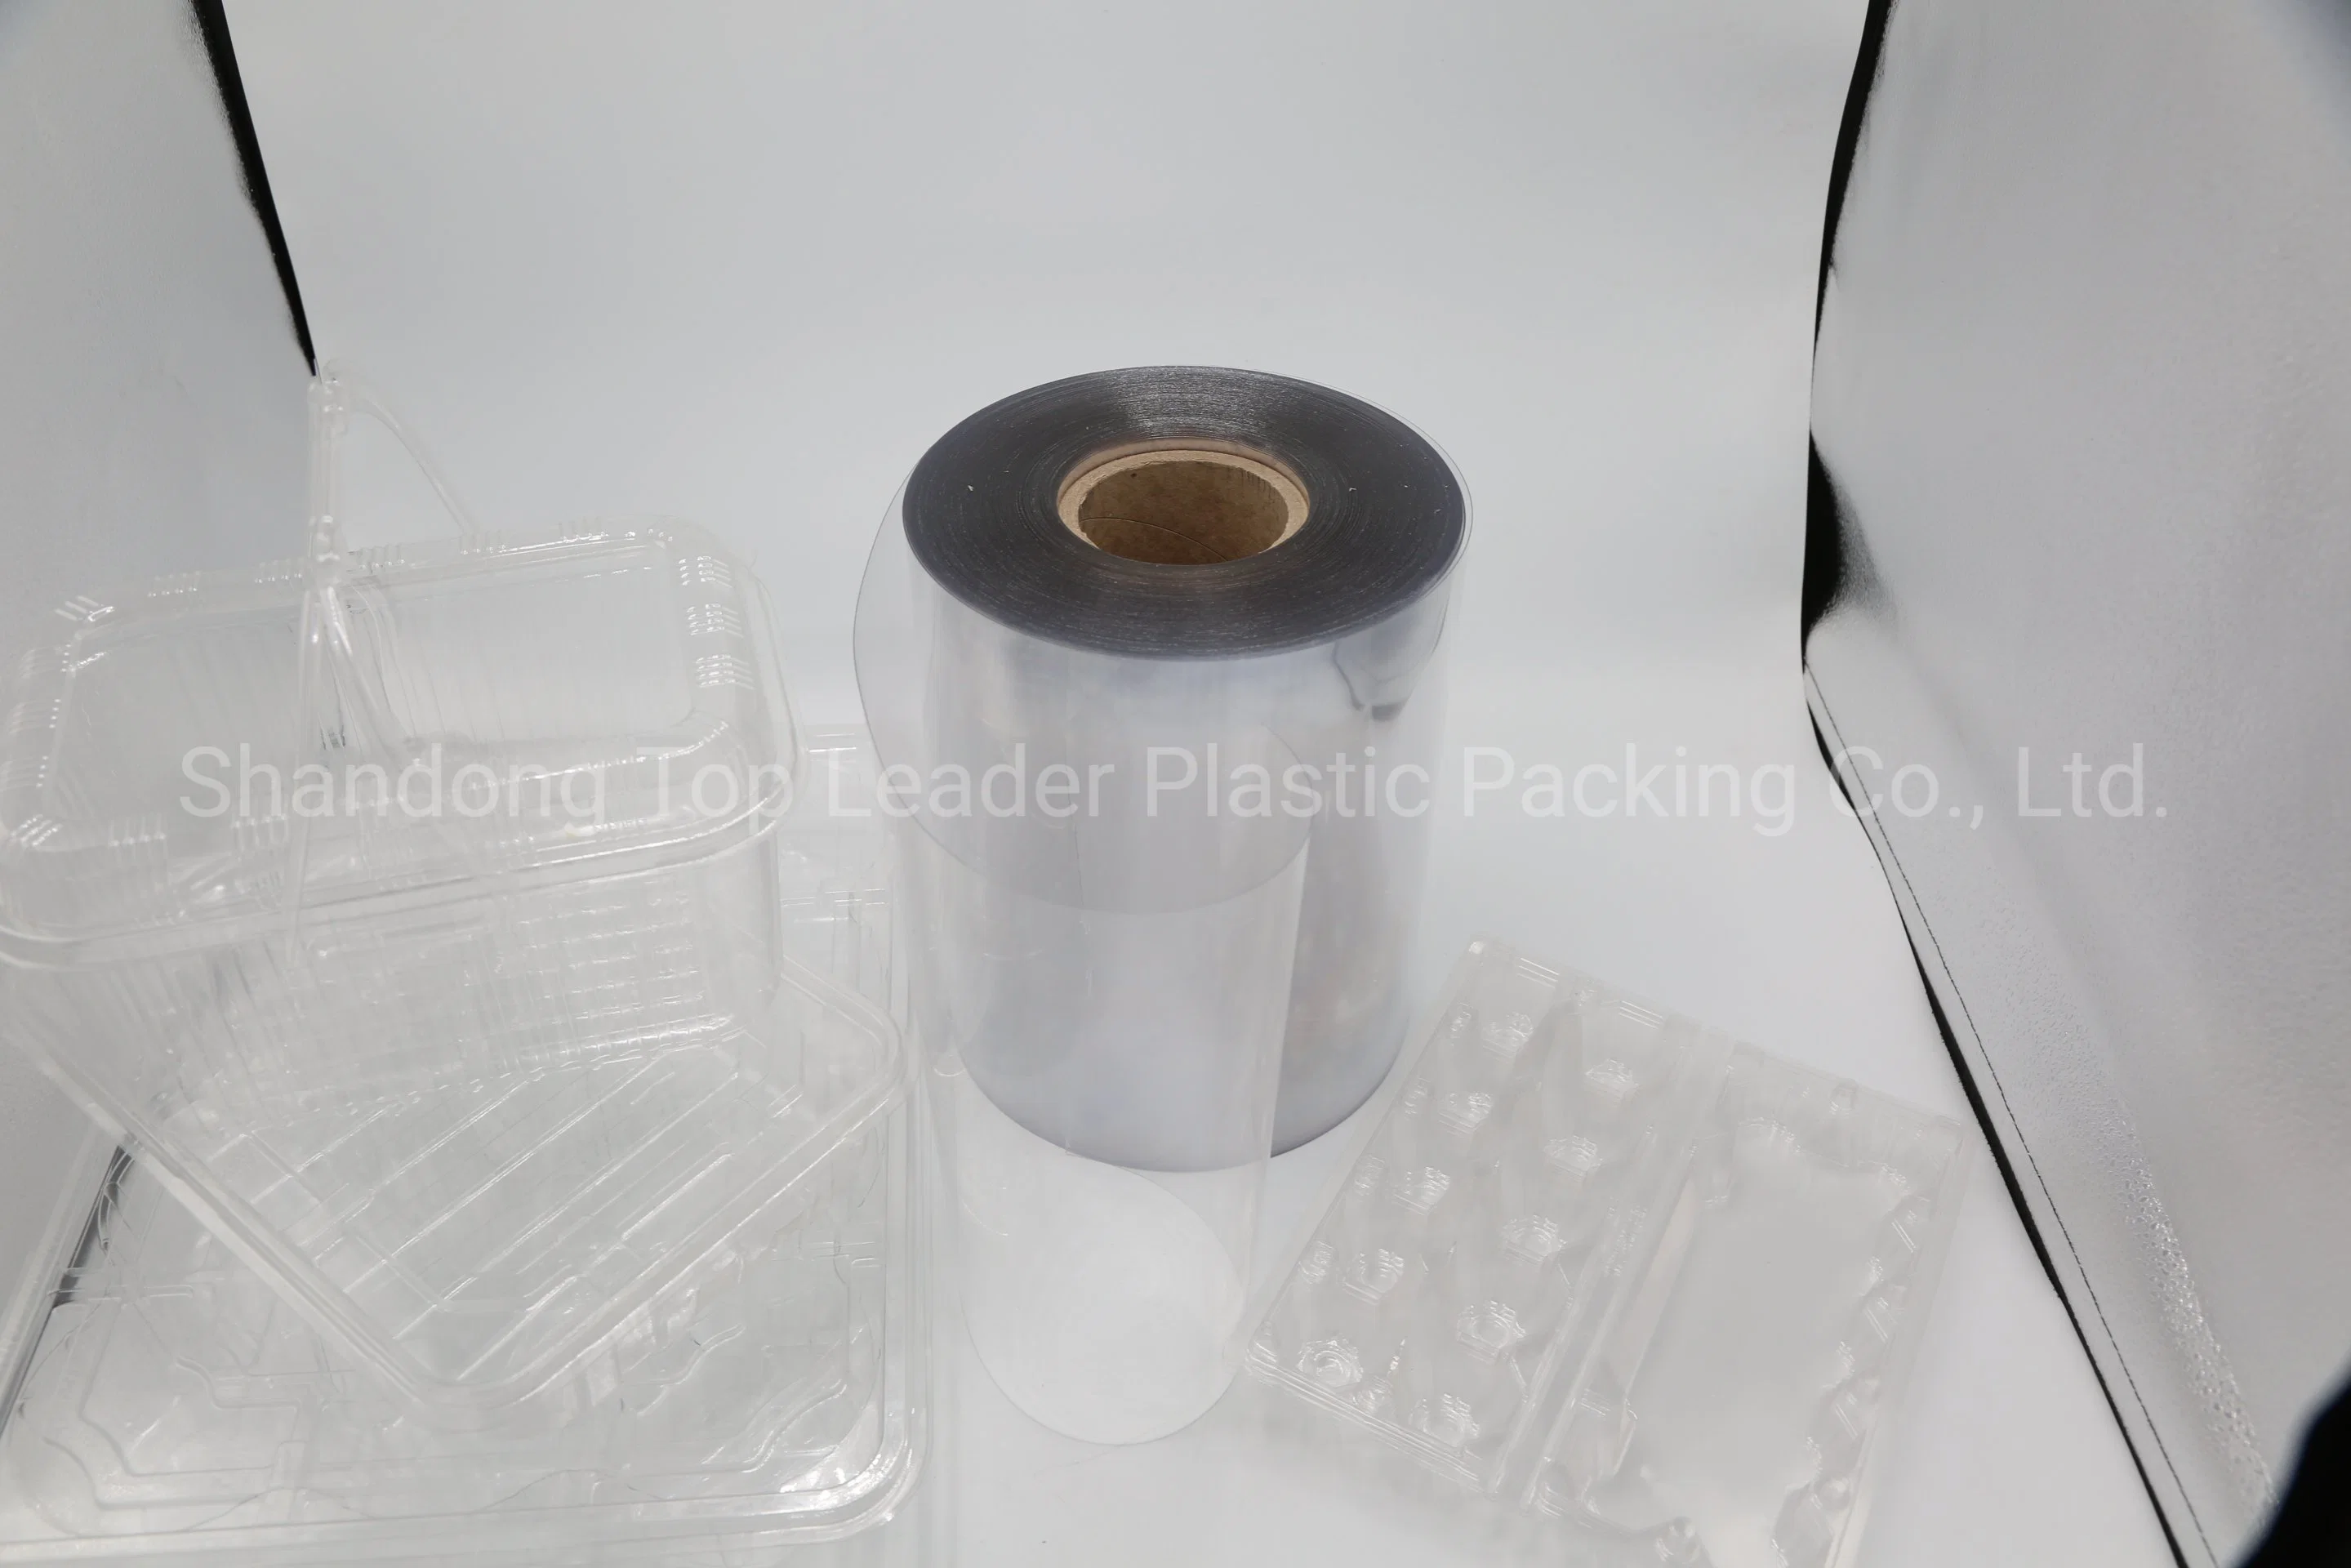 APET/PETG Sheet 0.5mm Super Clear Rigid Electronic Packaging Vacuum Forming Plastic Transparent for Thermoforming Antistatic, Dissipative and Conductive Trays